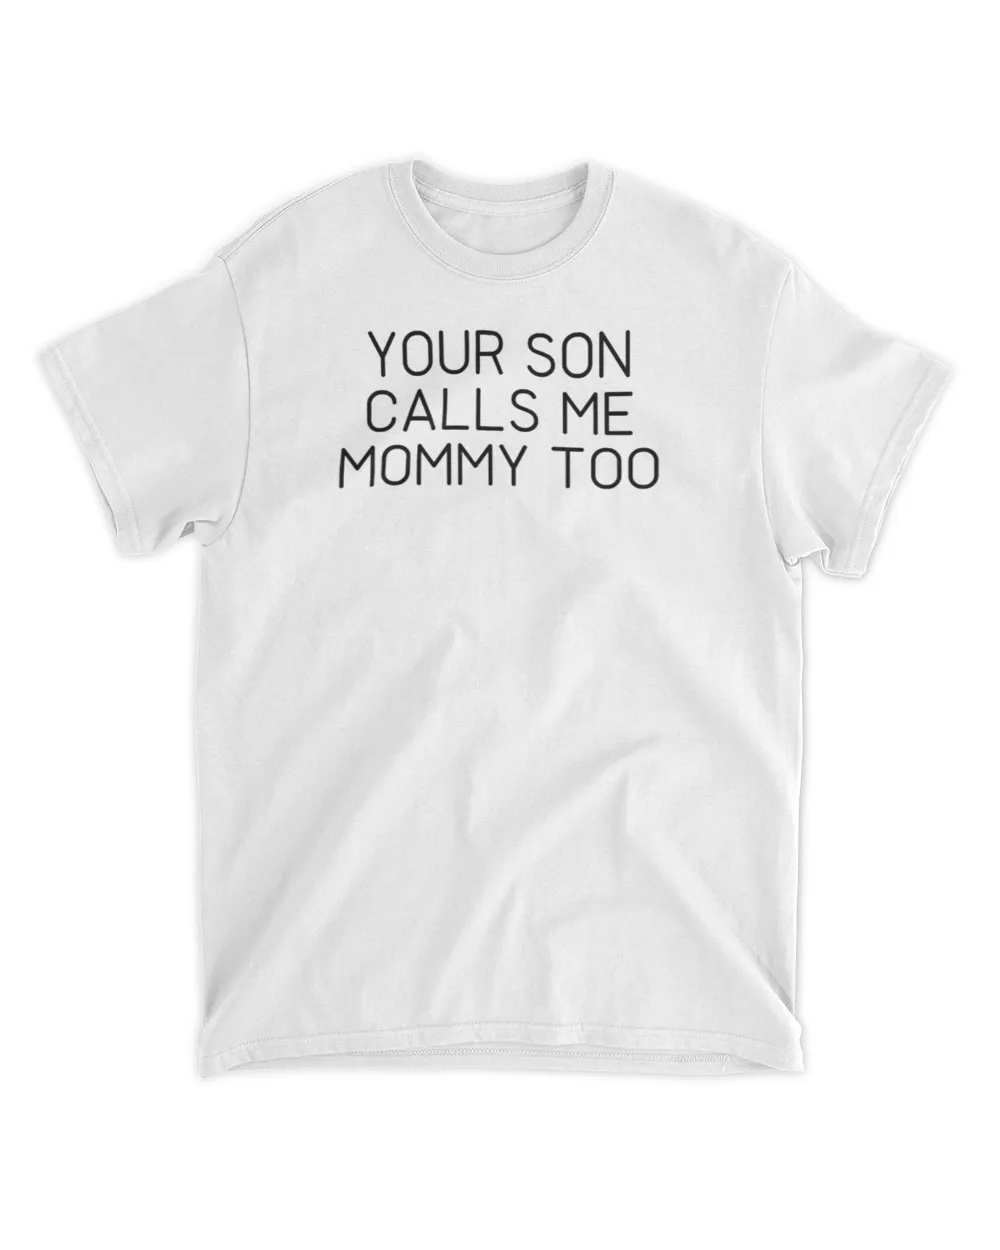  Your son calls me mommy too shirt